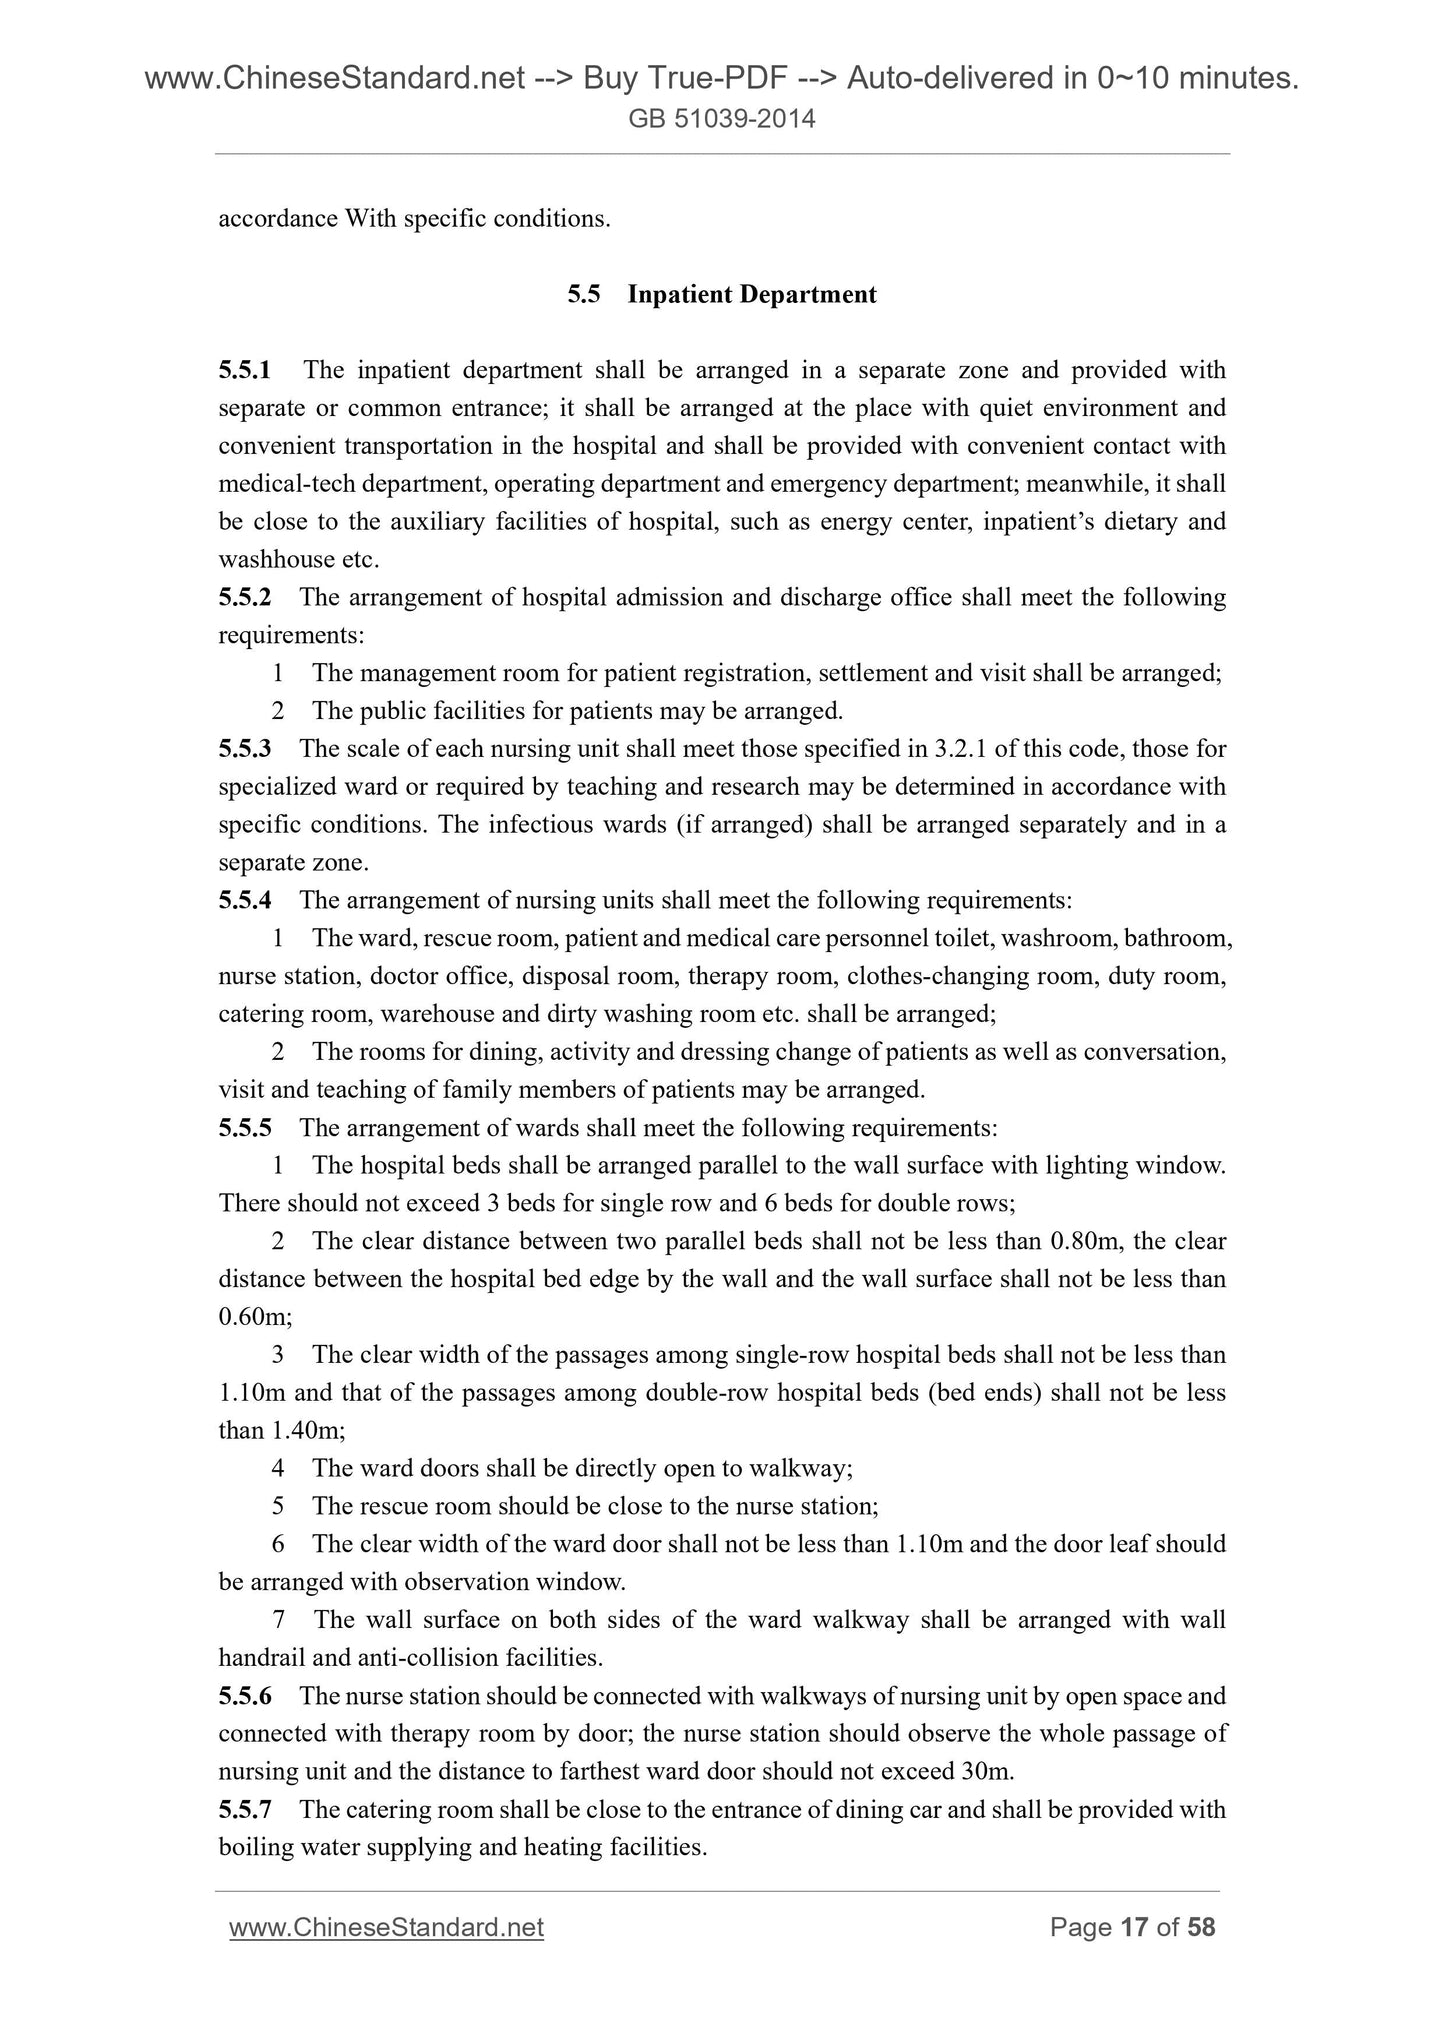 GB 51039-2014 Page 9